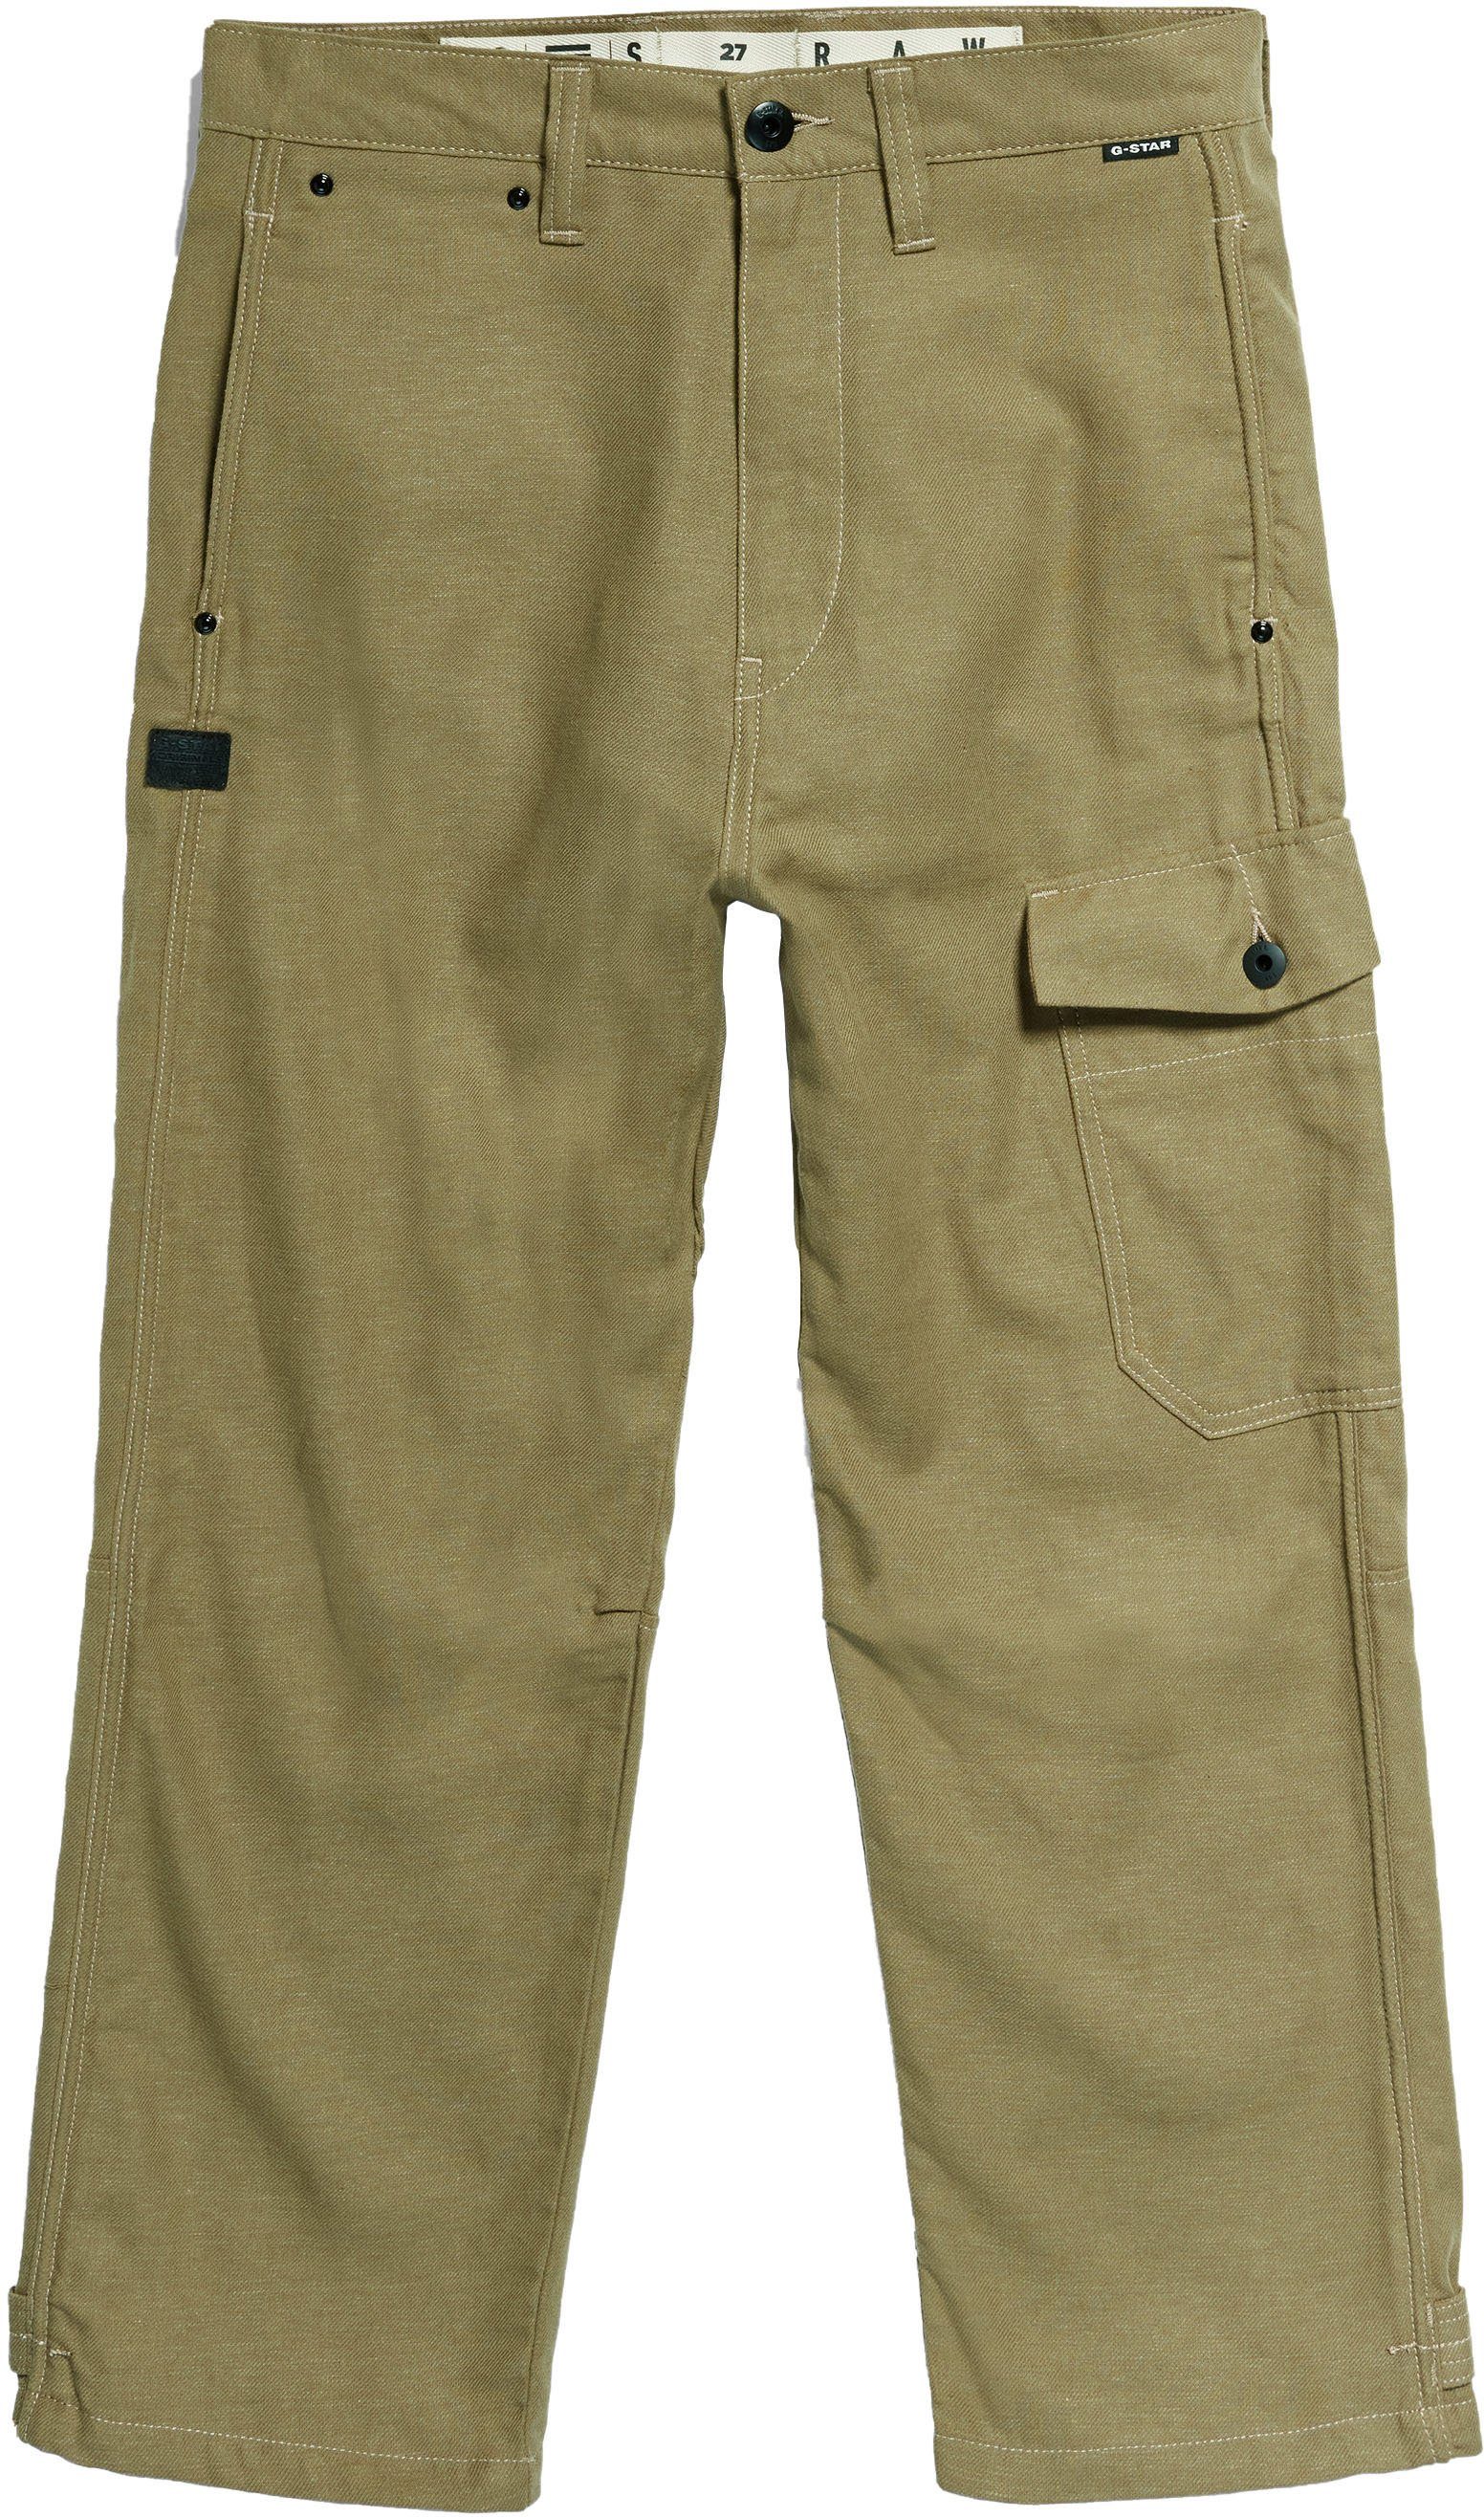 Cargo RAW Cargohose Relaxed G-Star